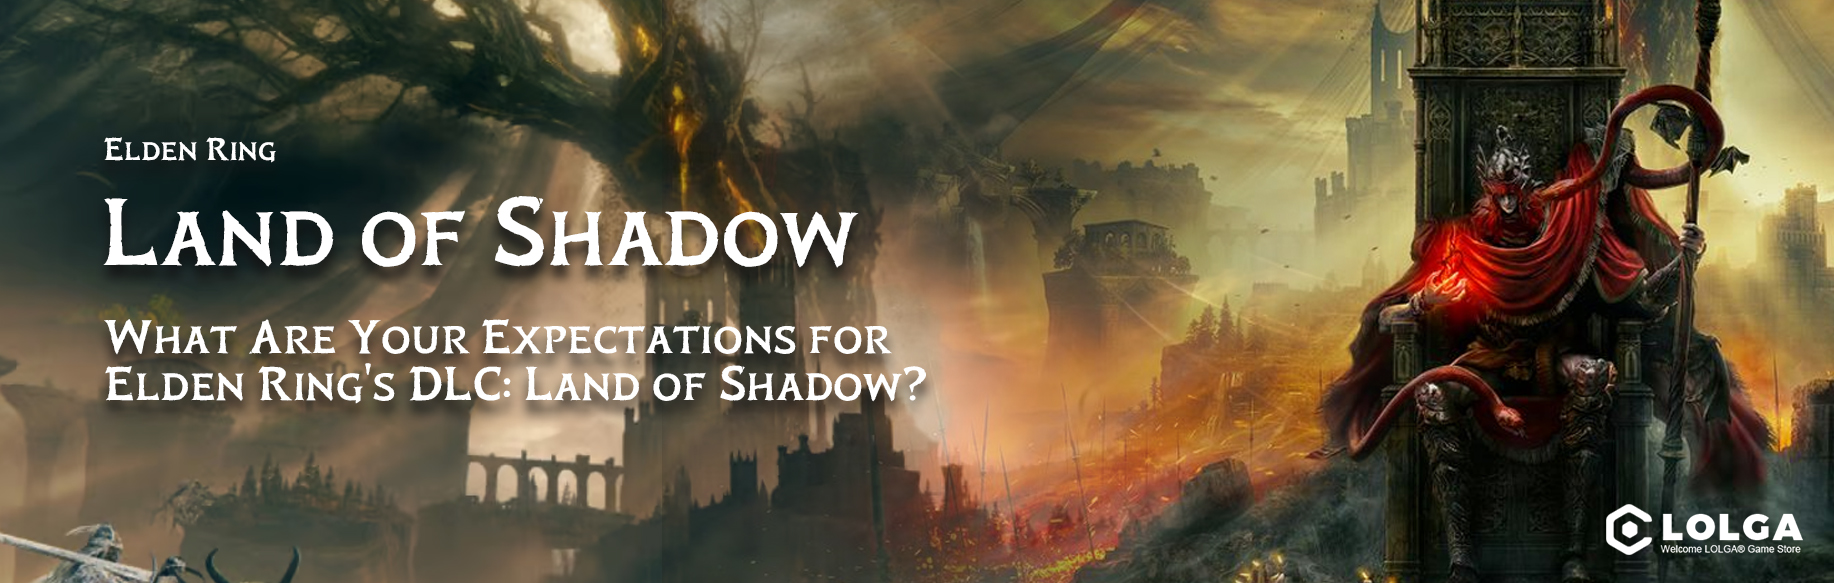 What Are Your Expectations for Elden Ring's DLC: Land of Shadow?